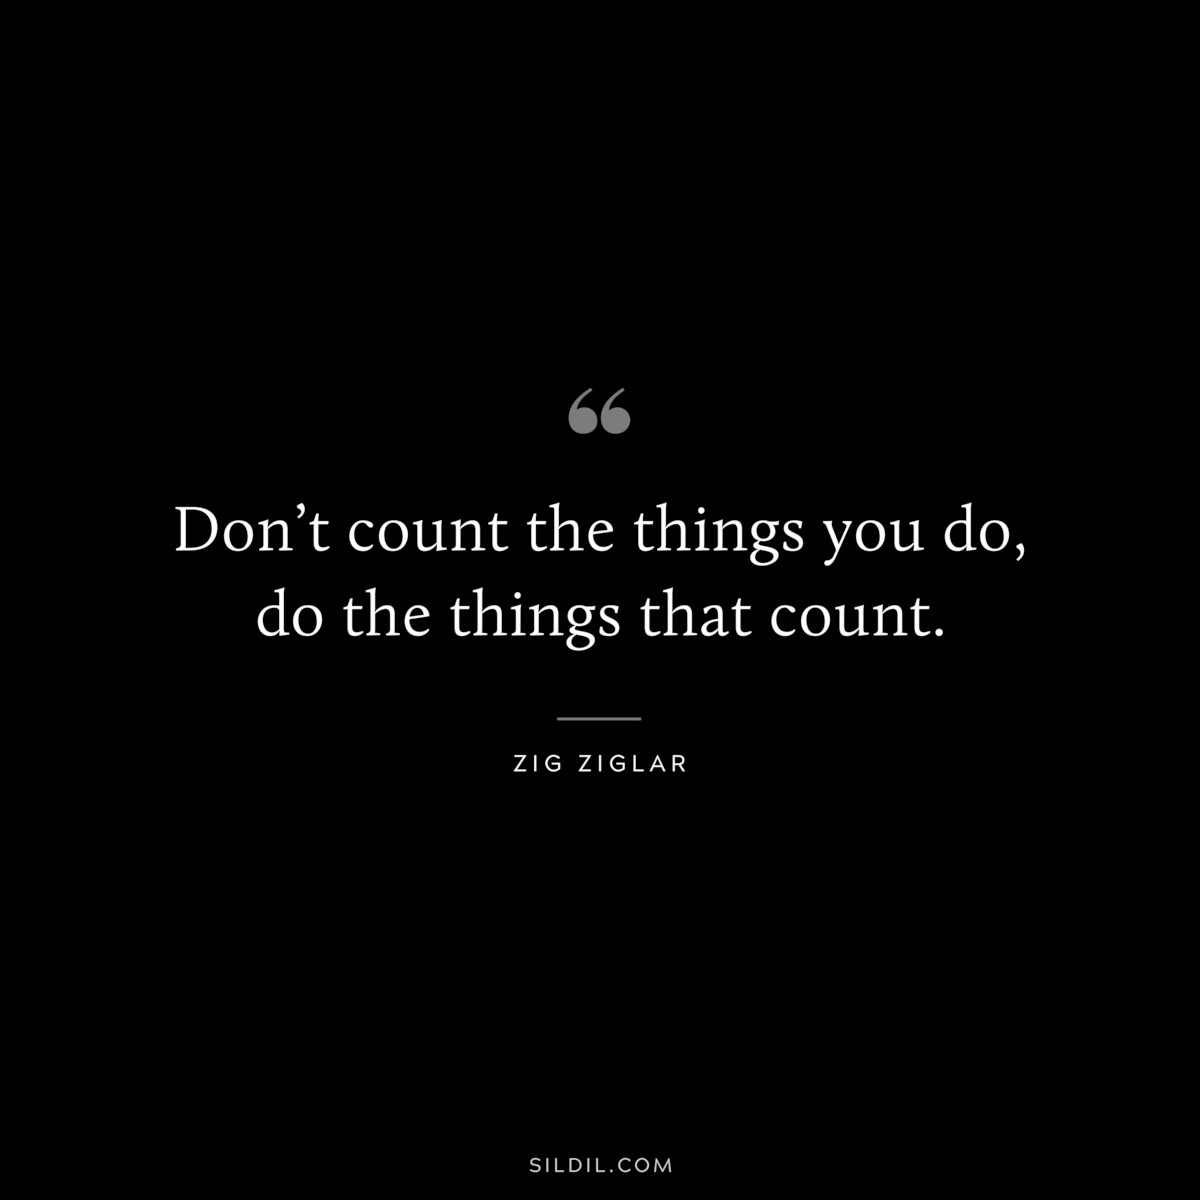 Don’t count the things you do, do the things that count. ― Zig Ziglar